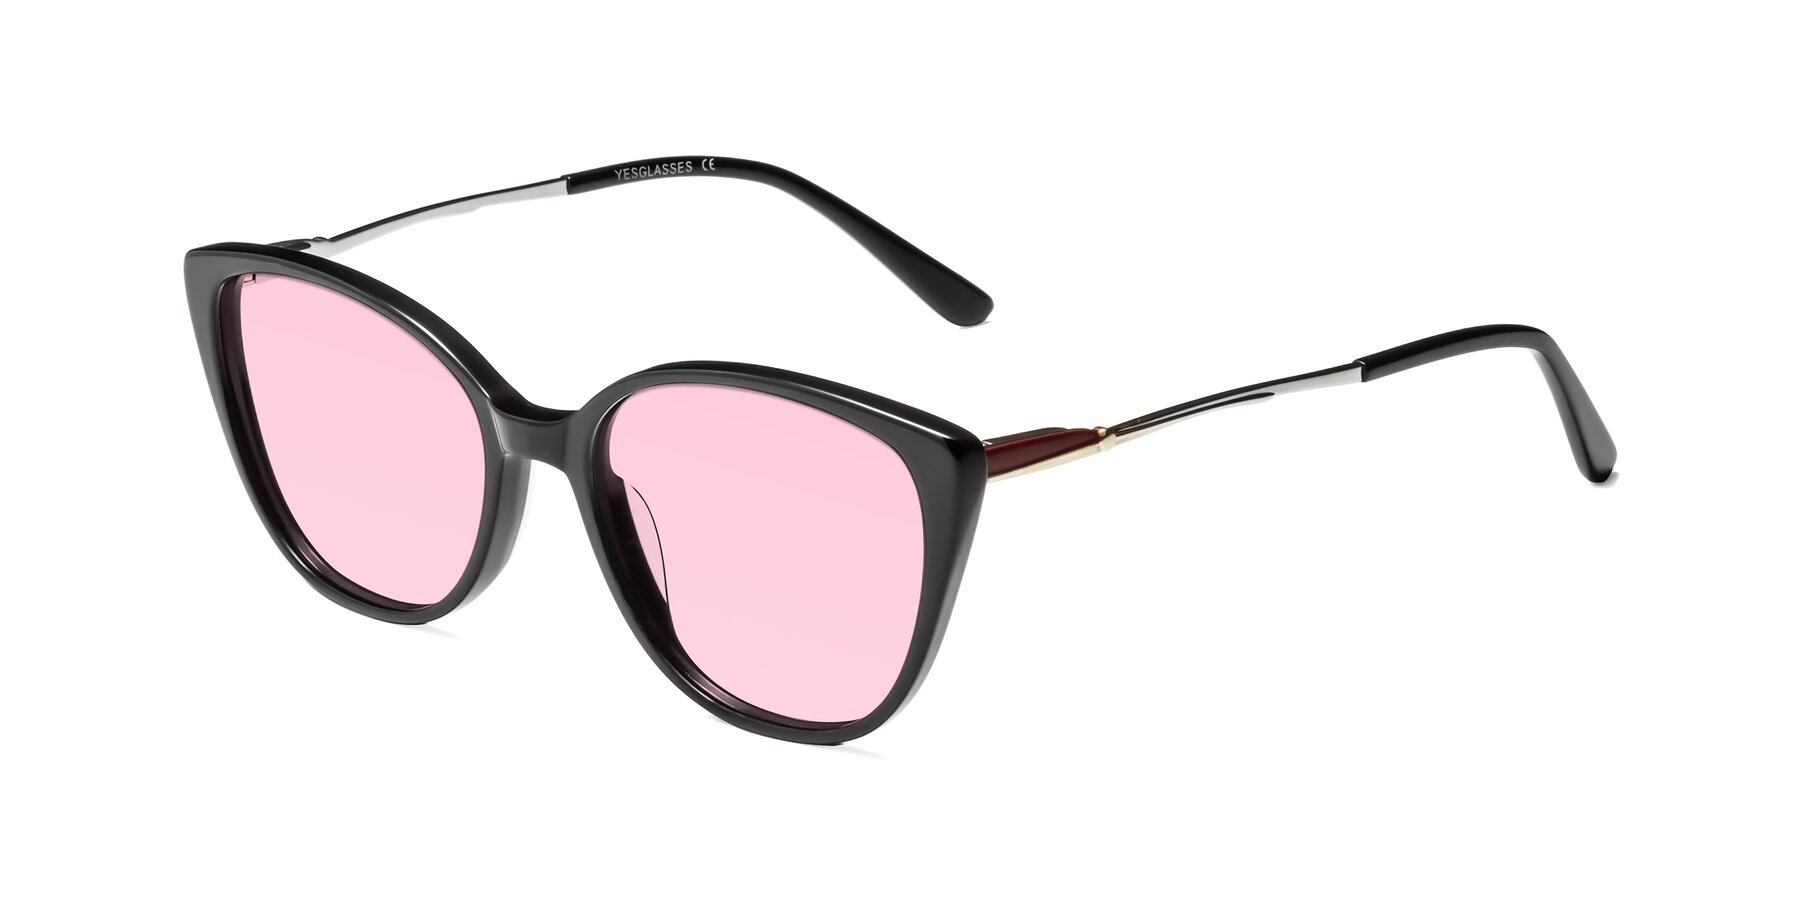 Angle of 17424 in Black with Light Pink Tinted Lenses